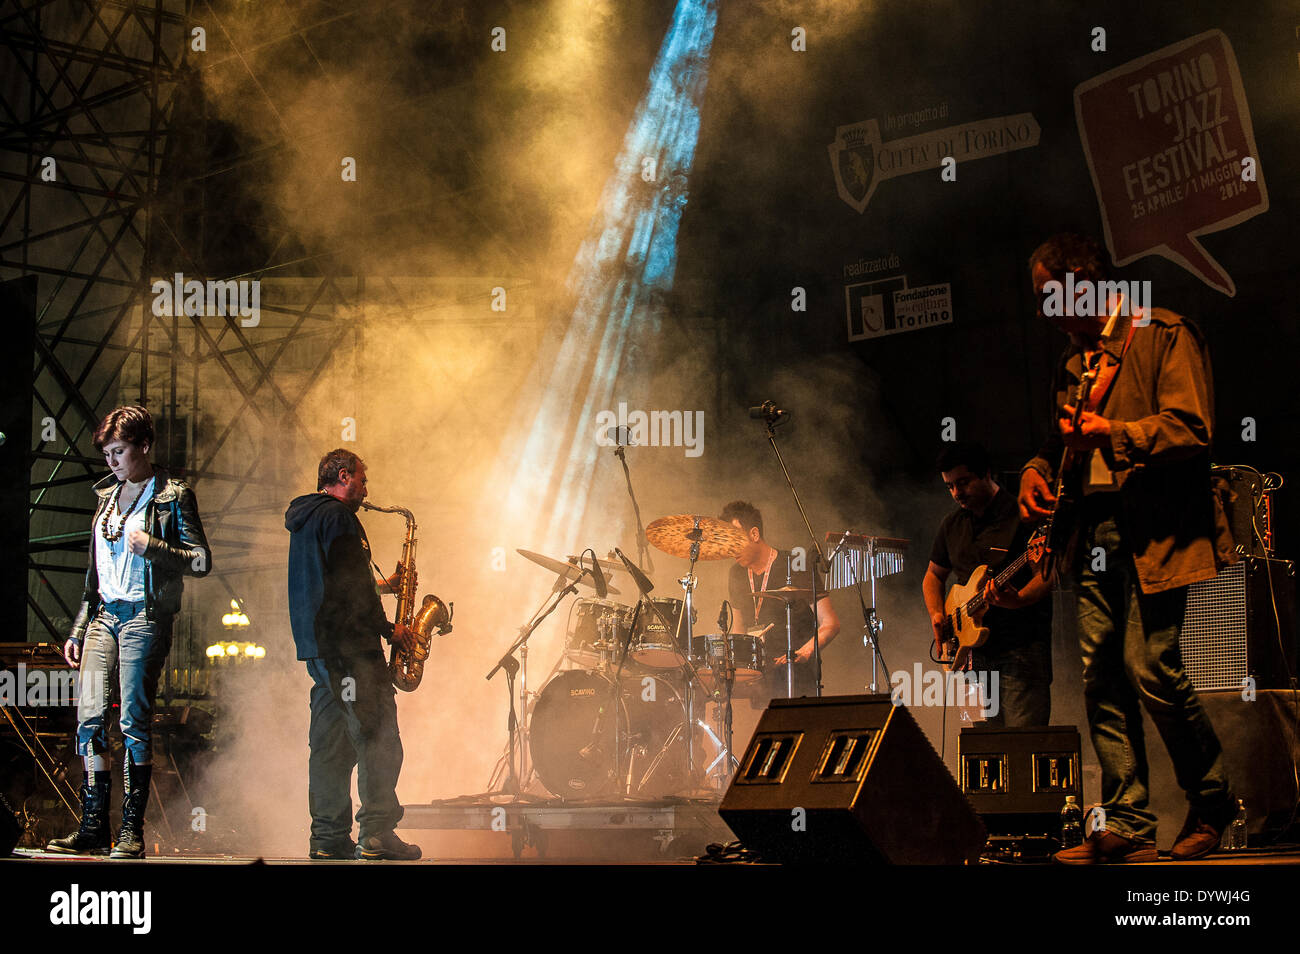 Turin, Italy. 25th Apr, 2014. ' Torino Jazz Festival 2014 - Start of the Festival 25 th April 2014 - Performance of Daniele Sepe und Rote Jazz Fraction Credit:  Realy Easy Star/Alamy Live News Stock Photo